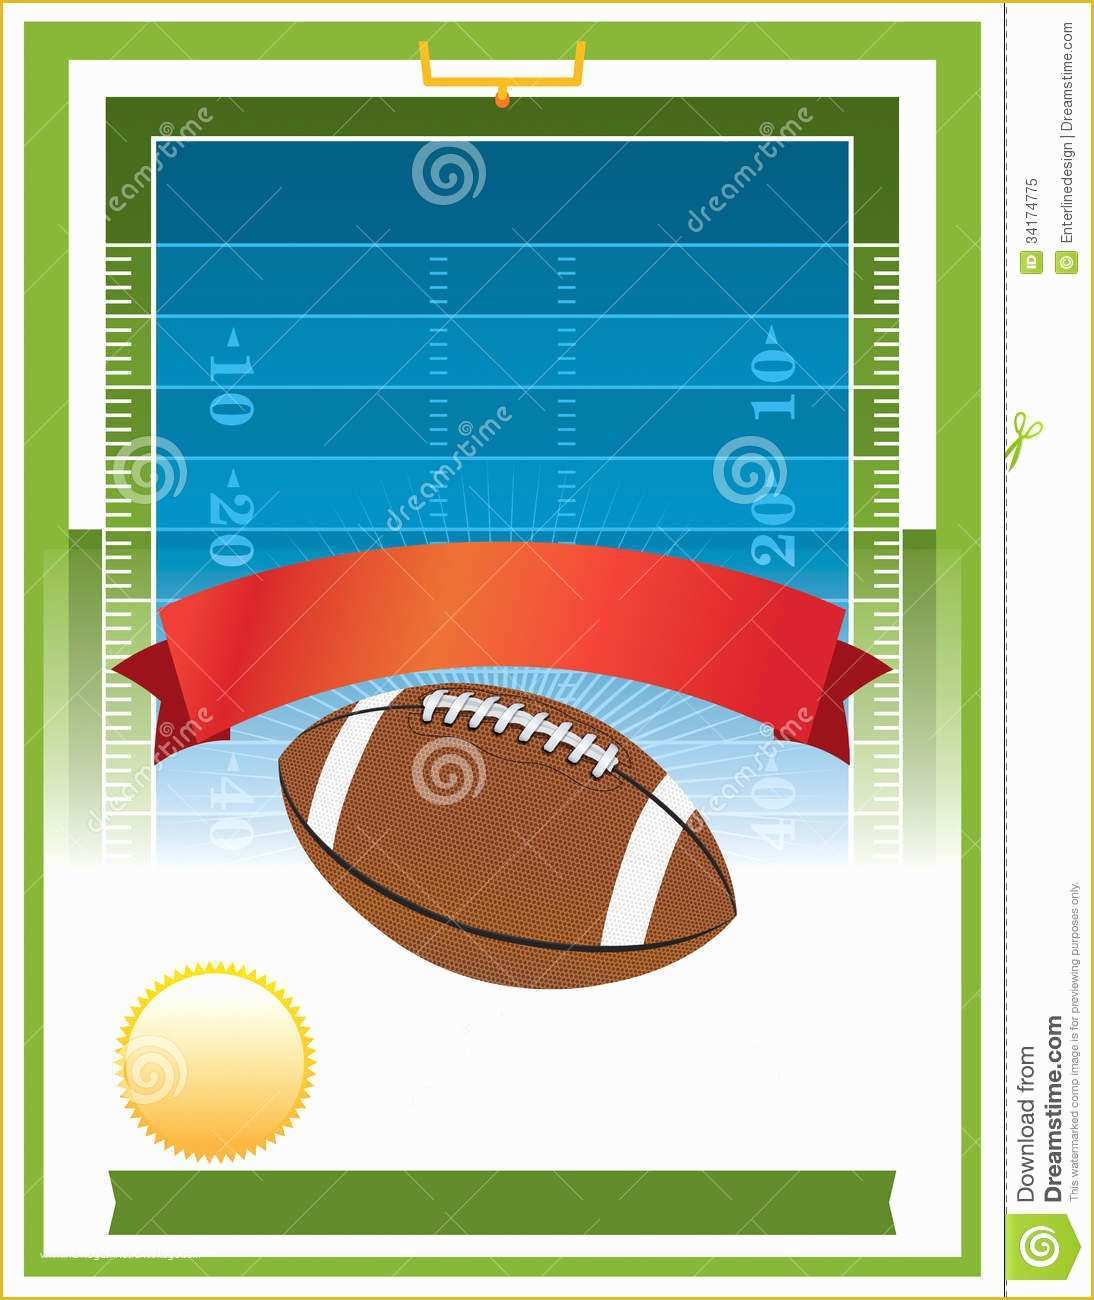 Football Flyer Template Free Of American Football Tailgate Party Flyer Design Stock Vector